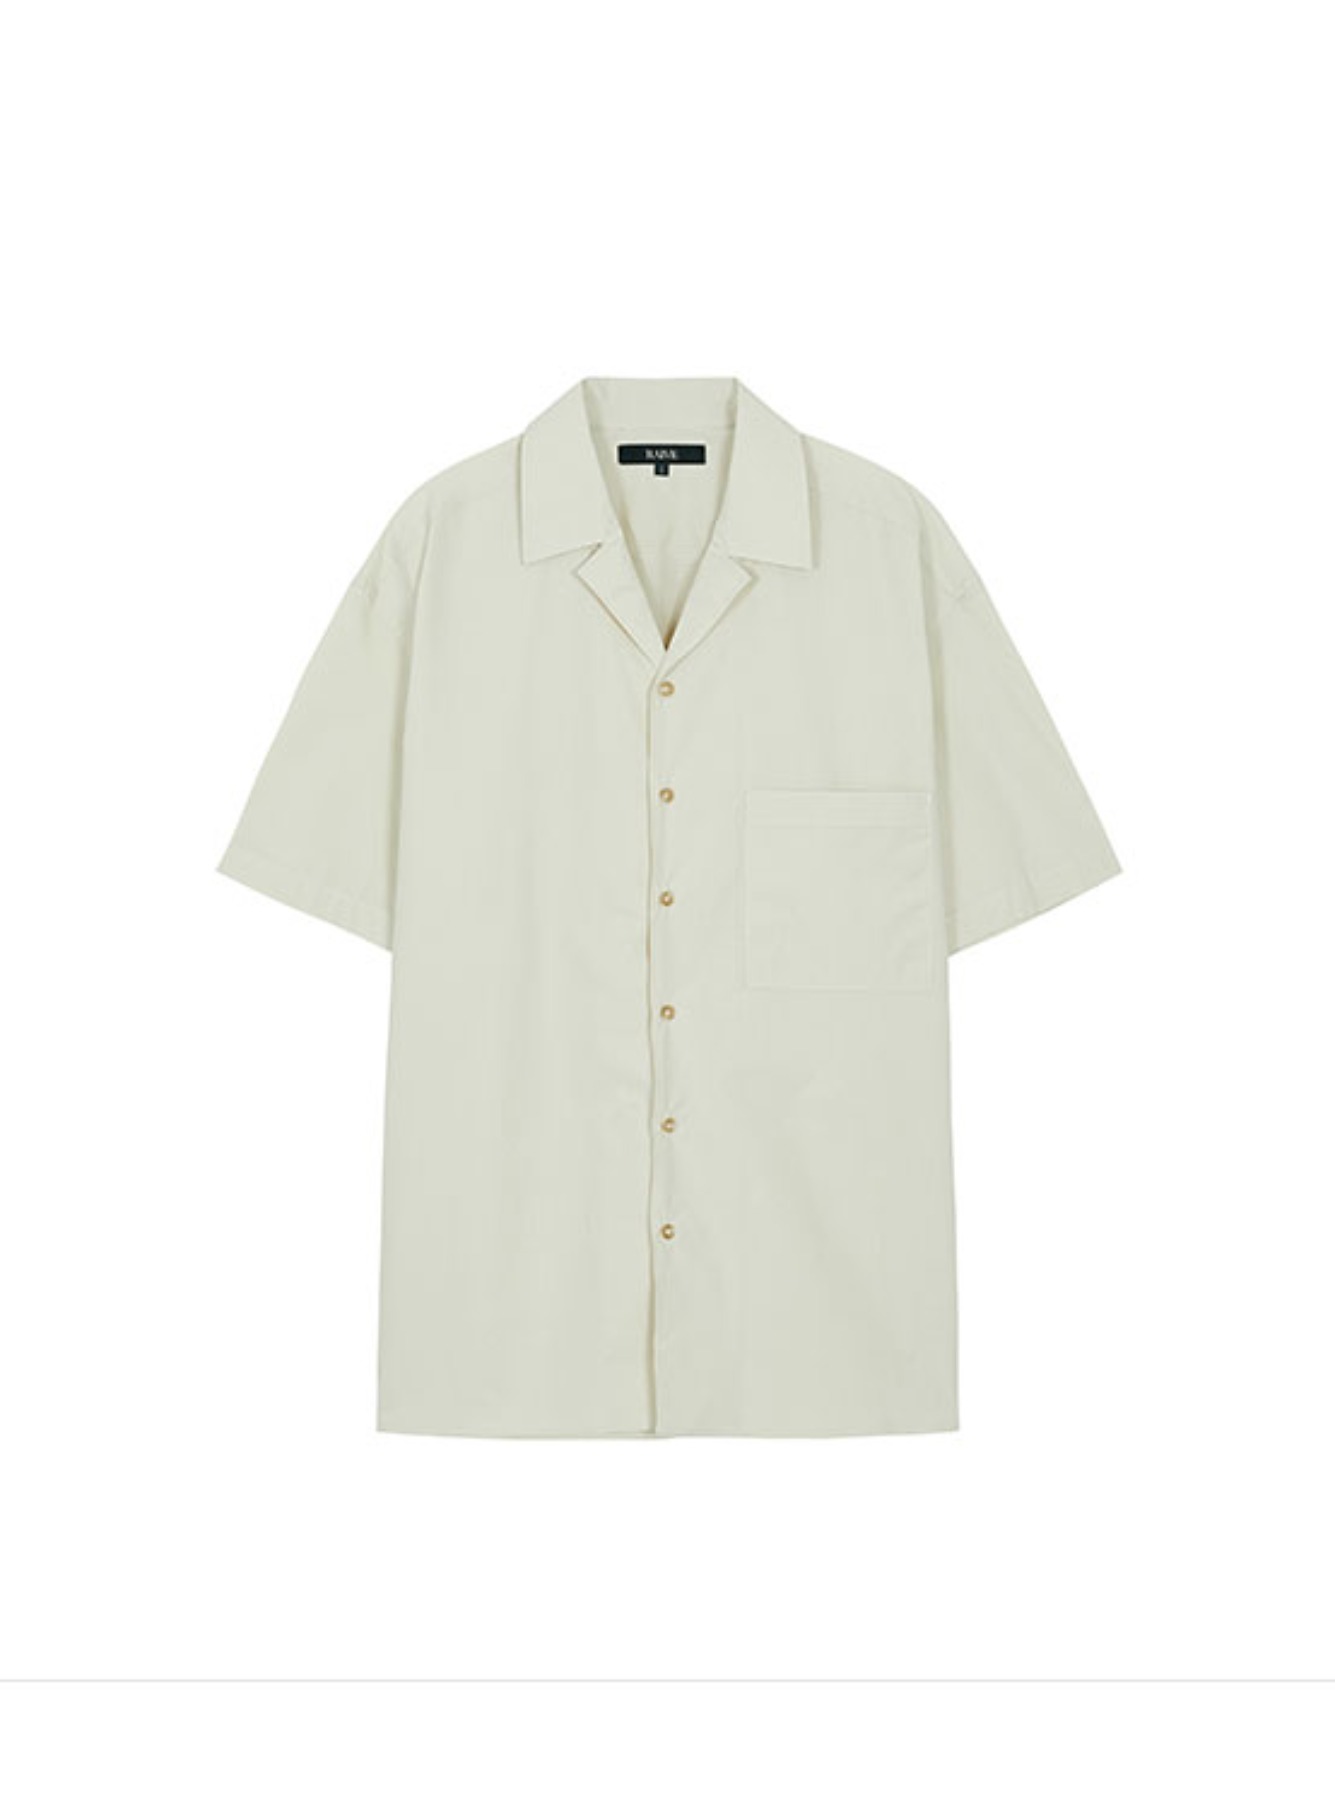 Solid Collar Shirt in Cream VW2MB801-9A